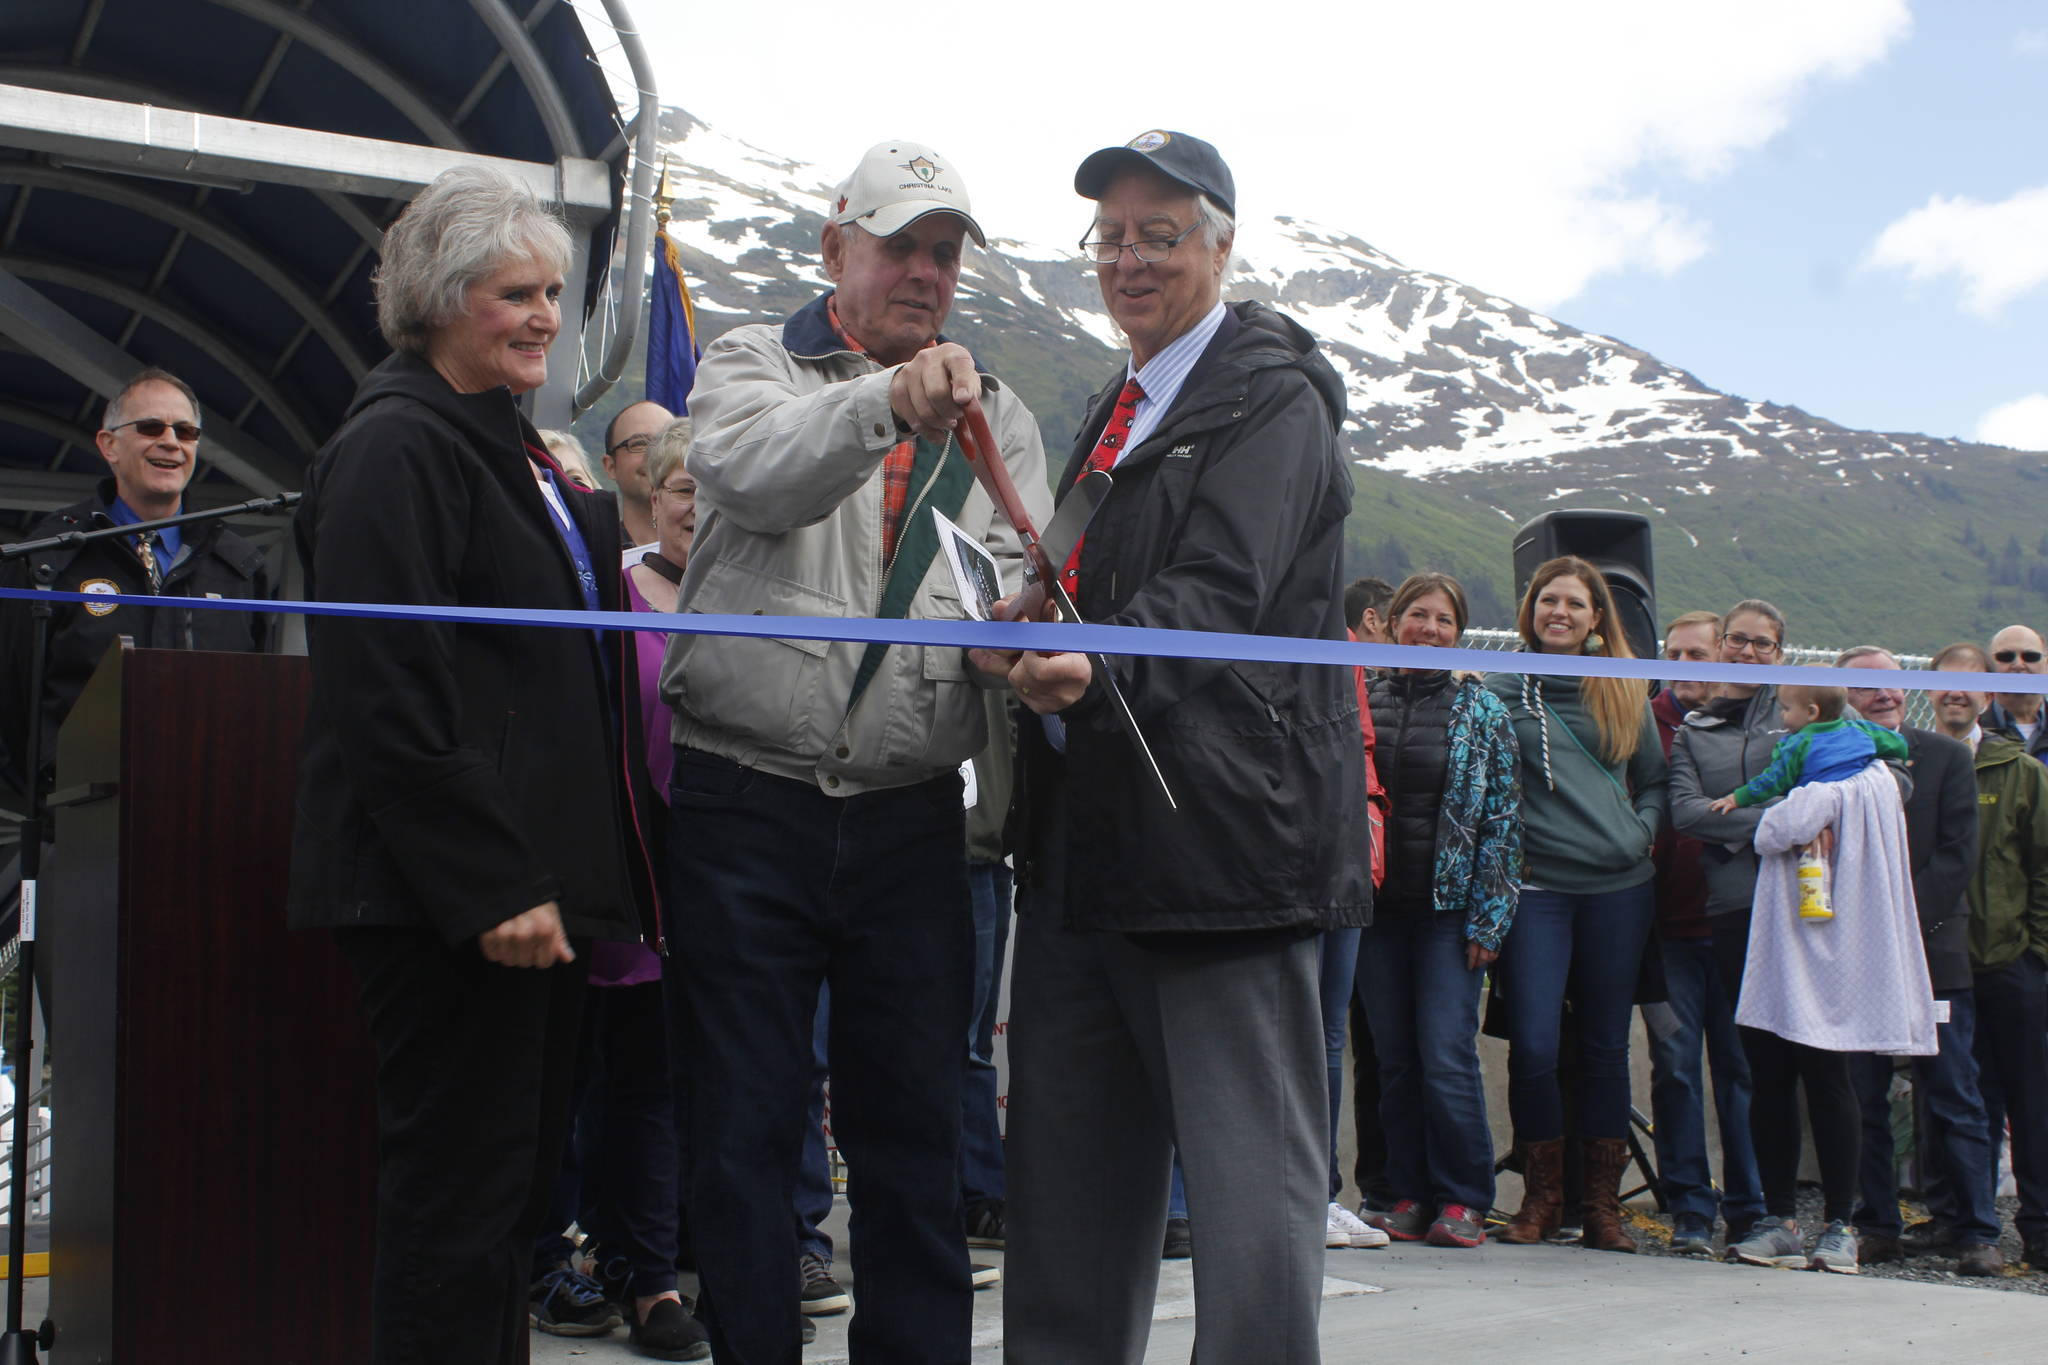 From left, Sharon Pusich Gill, Louie Pusich and Mayor Ken Koelsch lead the ribbon-cutting ceremony for the new Mike Pusich Douglas Harbor on Friday. The city completed renovations on the harbor this spring, which now carries the name of the former Douglas mayor who first advocated for the harbor. (Alex McCarthy | Juneau Empire)